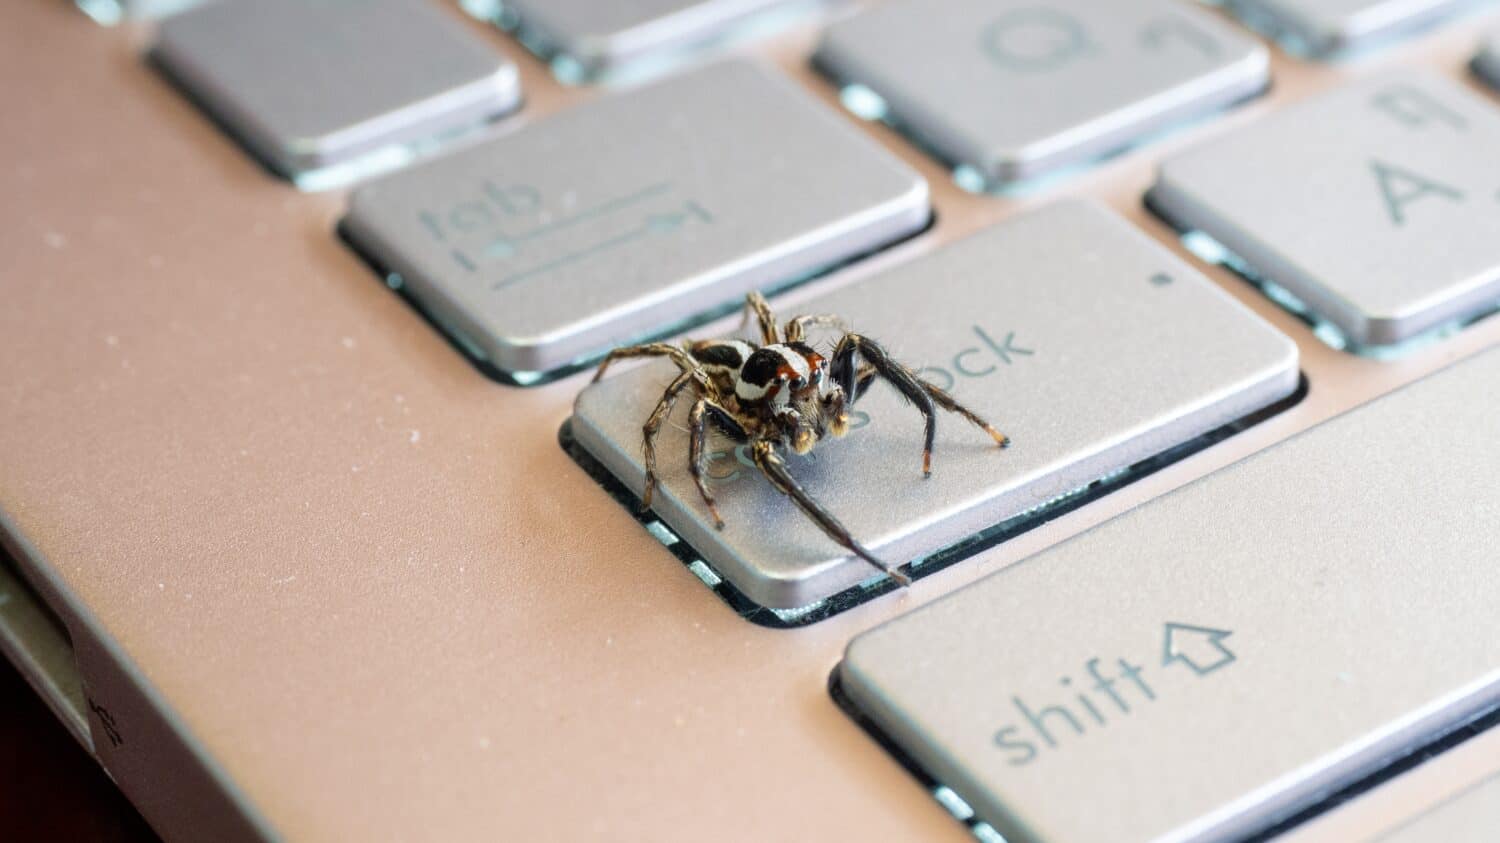 brown and white spider on the keyboard